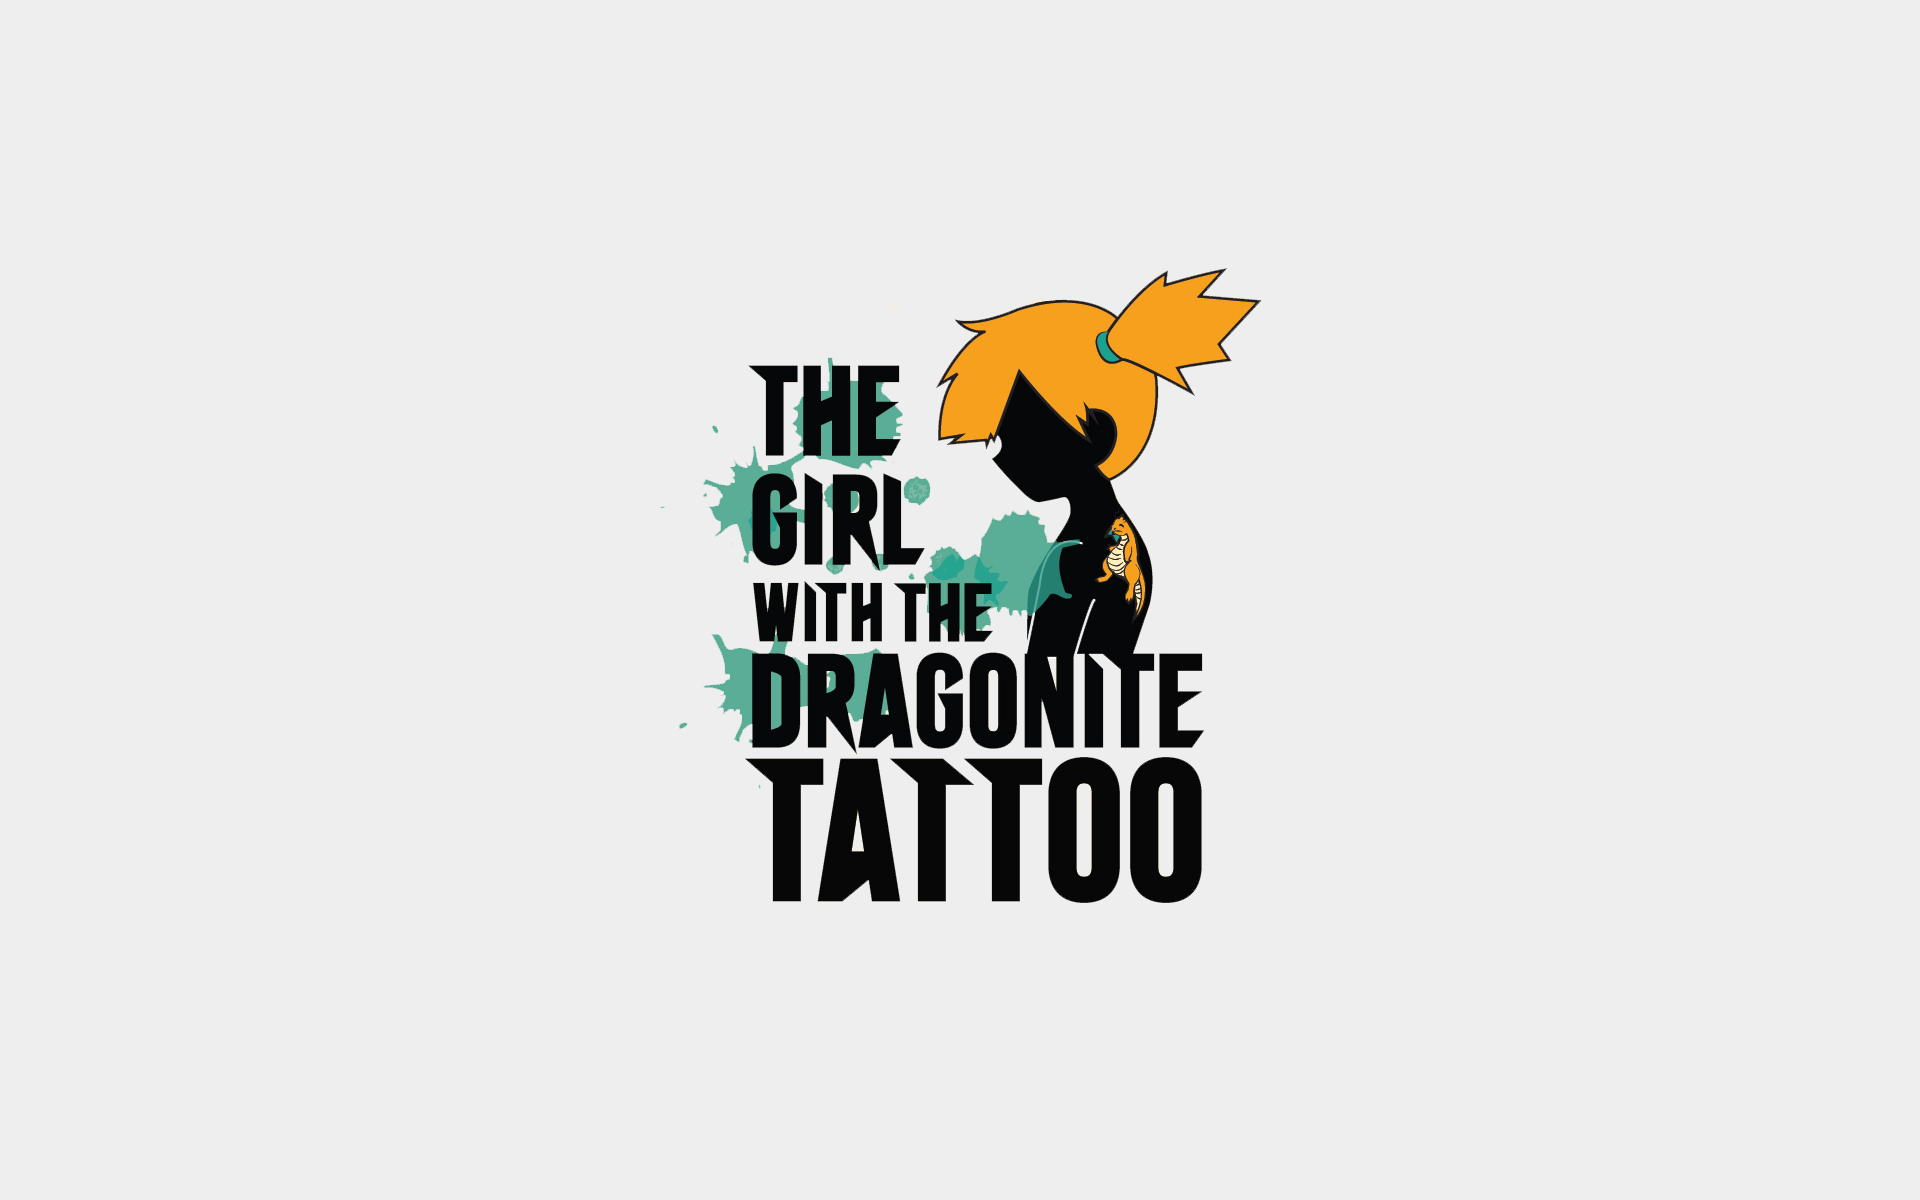 The Girl with the Dragonite Tattoo